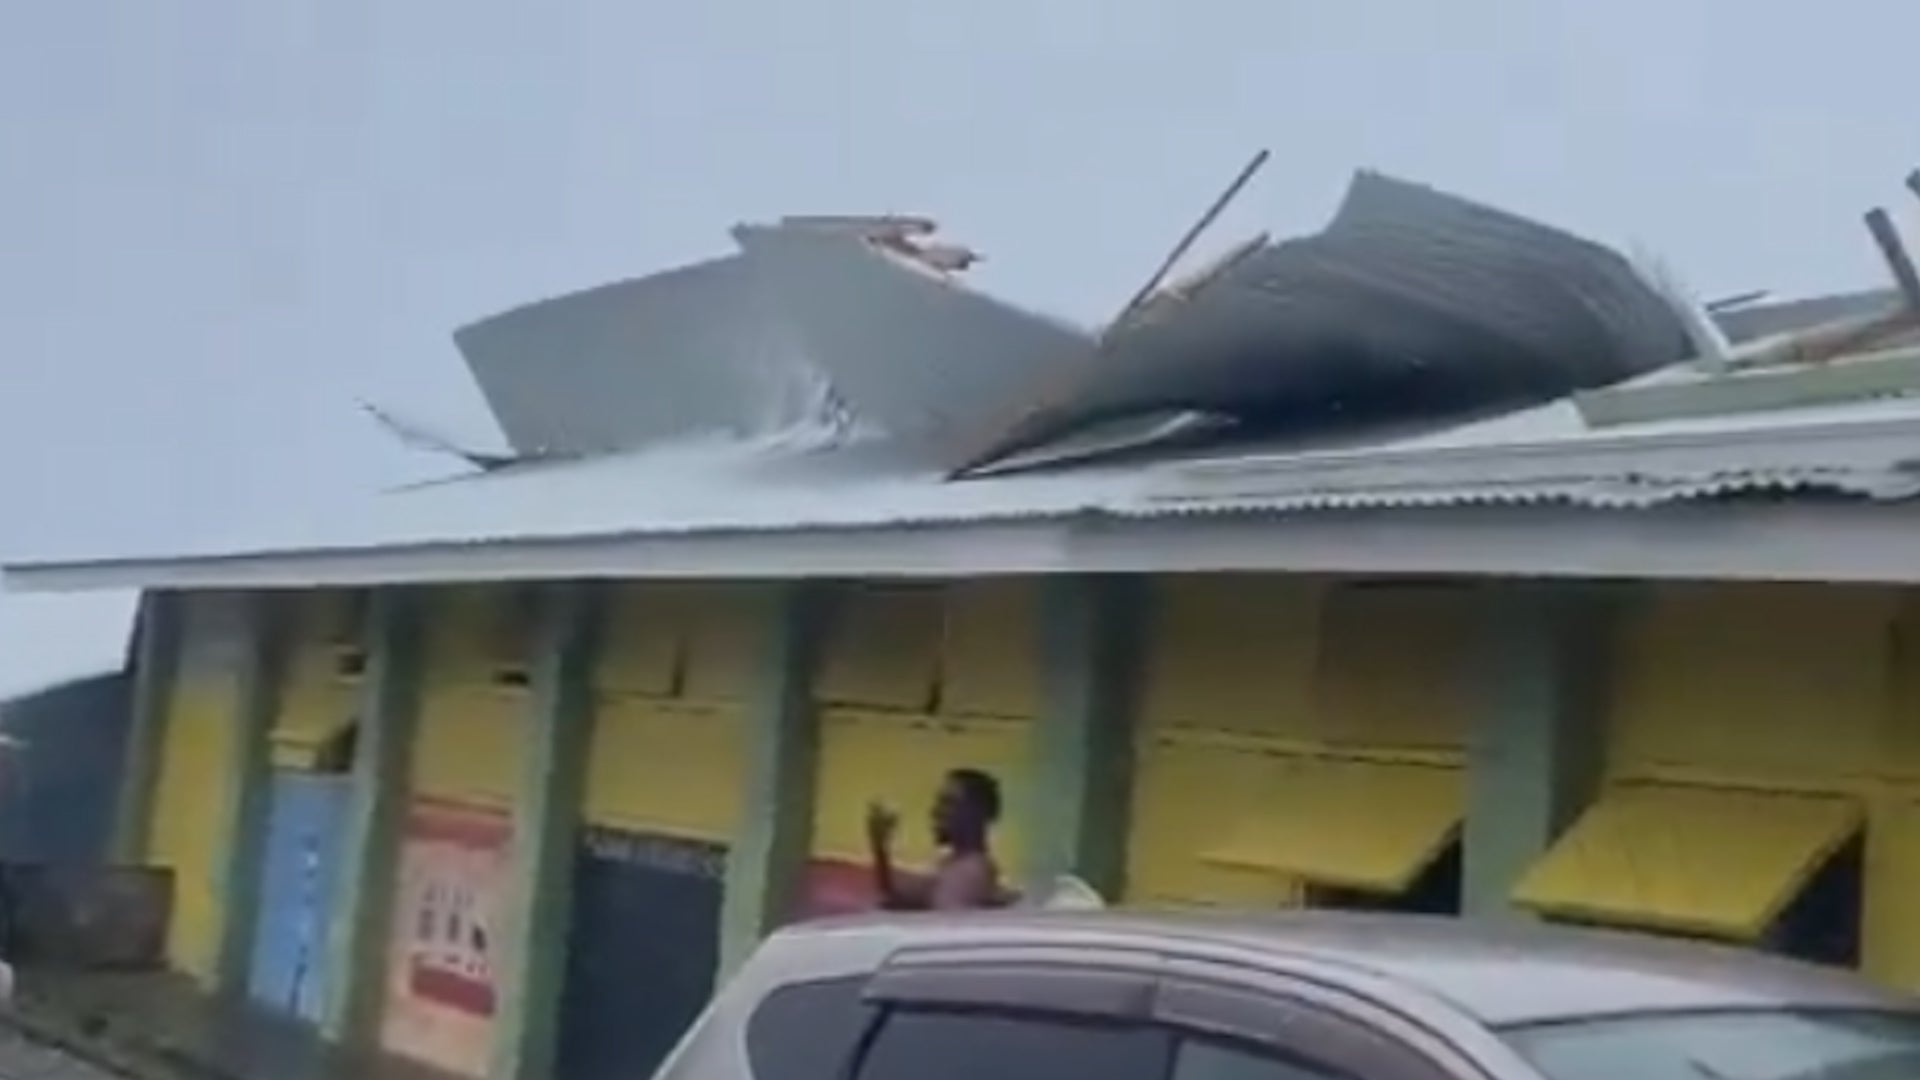 Hurricane Beryl tears roof off school as storm rips through Saint Vincent and the Grenadines